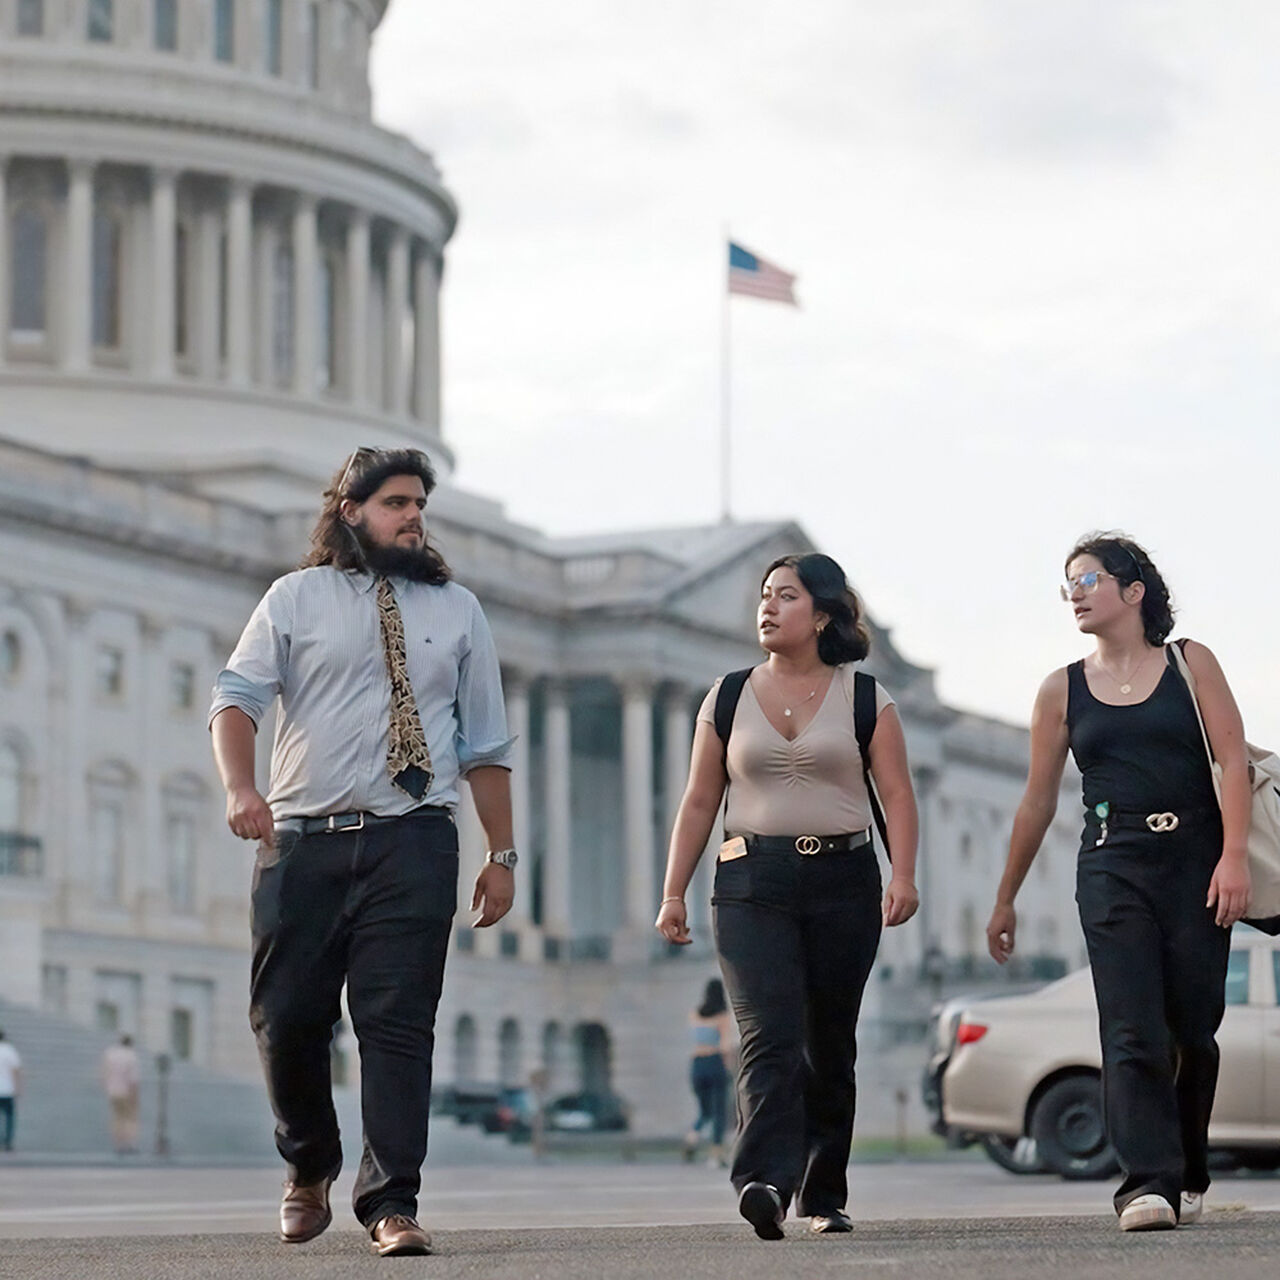 Rutgers students walking in front of the capital building in Washington D.C. image number 0